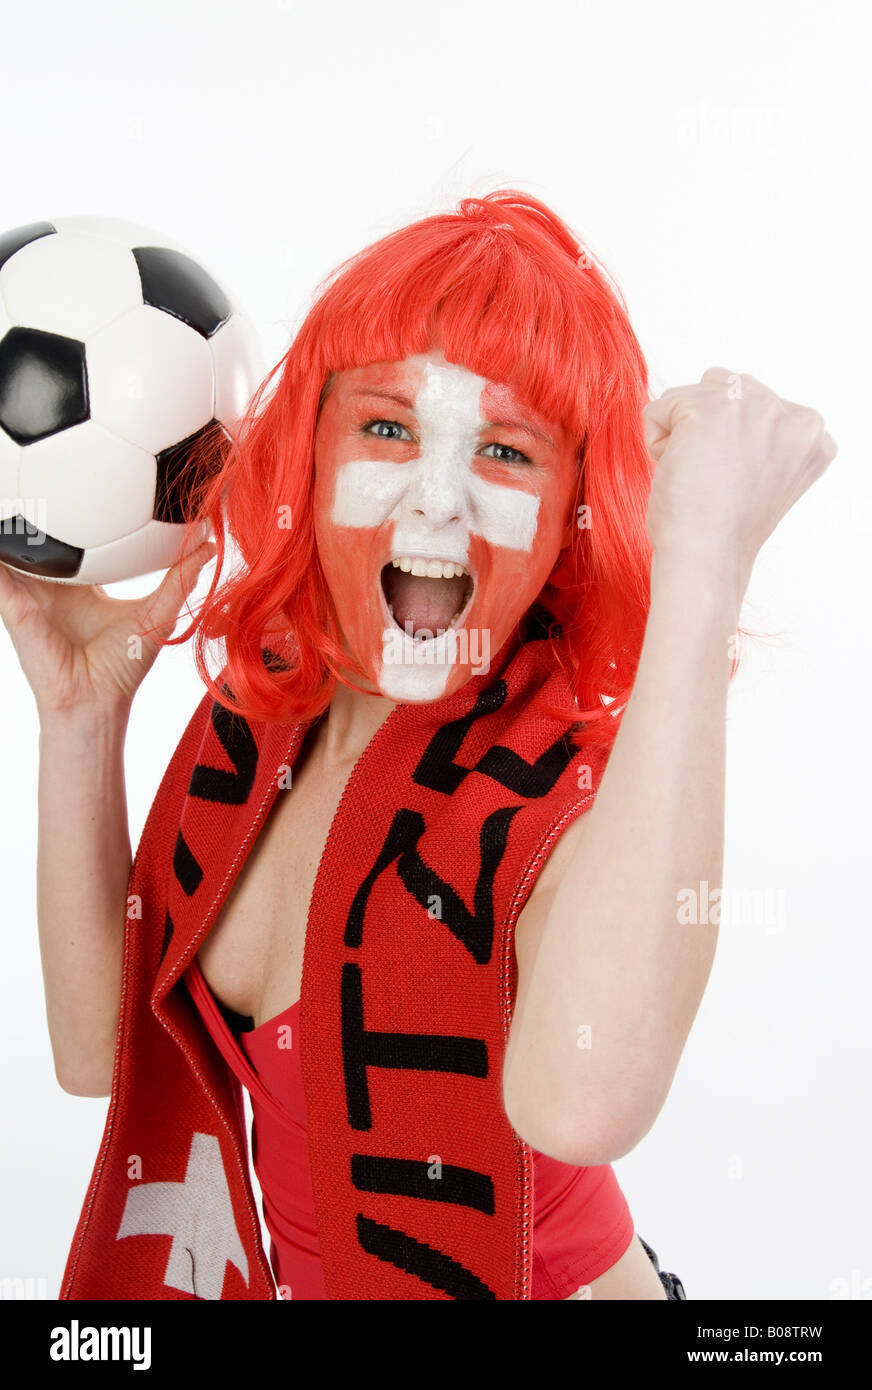 woman as Switzerland fan, cheering with a football and clenched fist Stock Photo